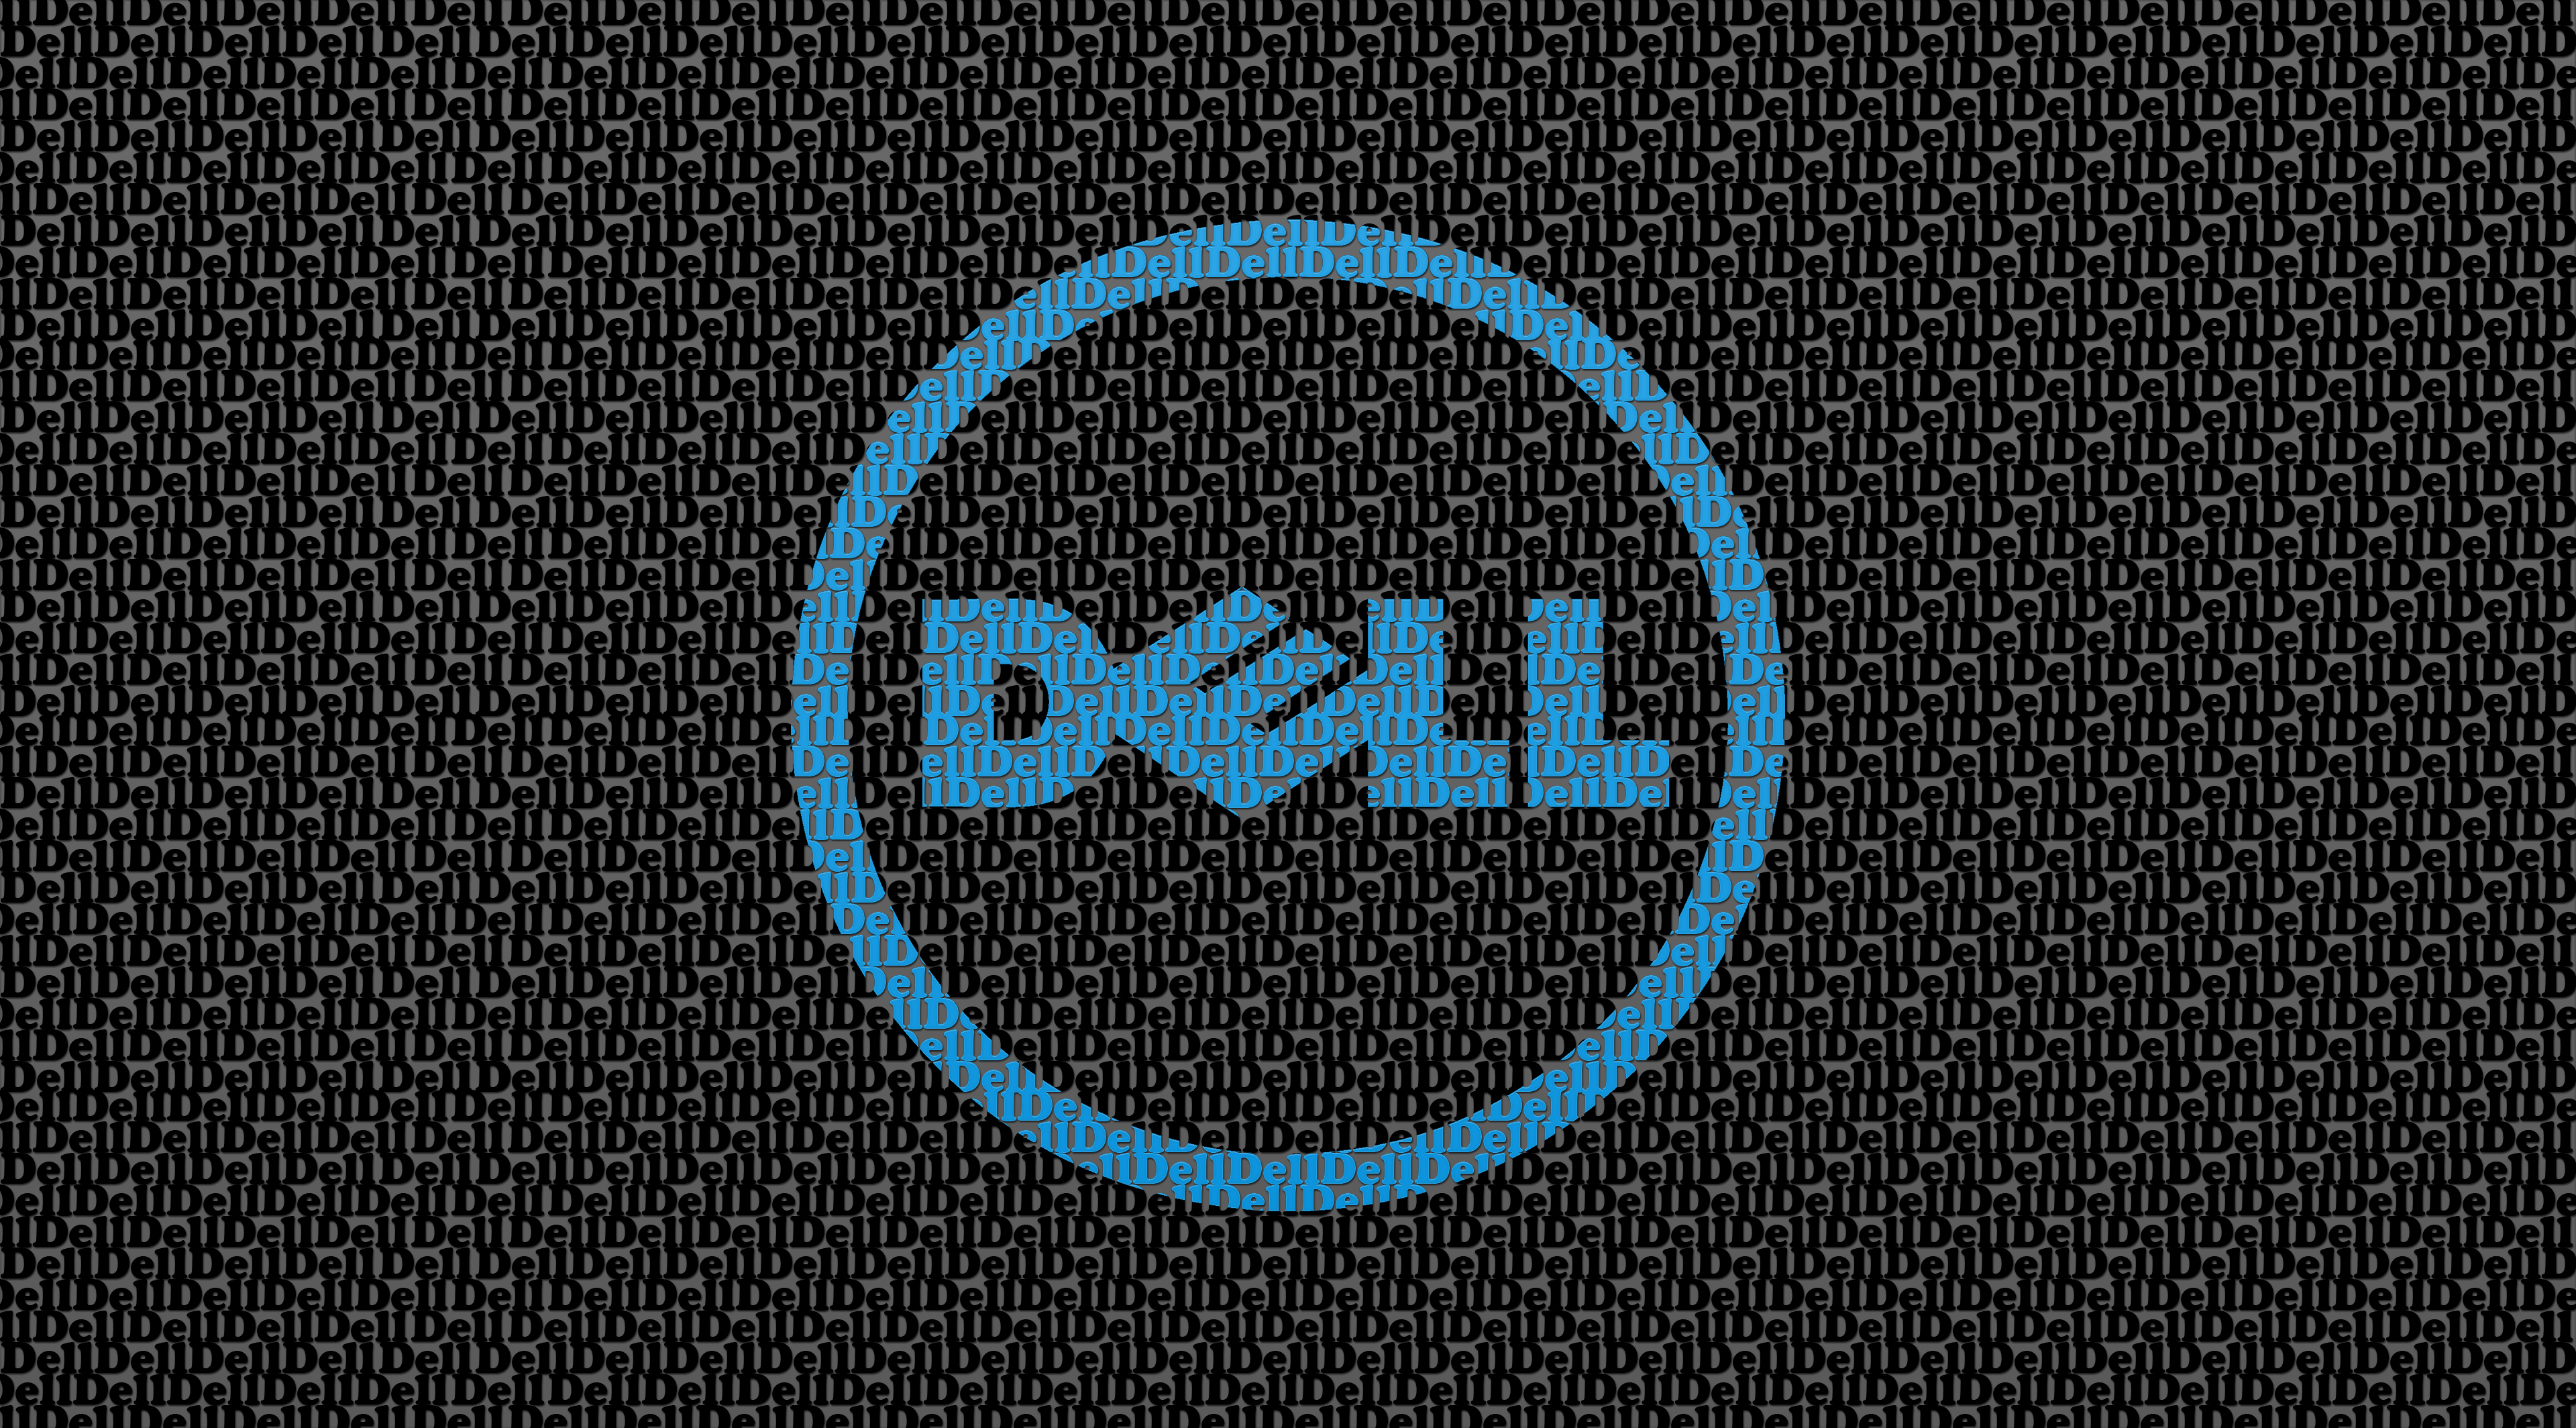 Dell Wallpapers 64 pictures